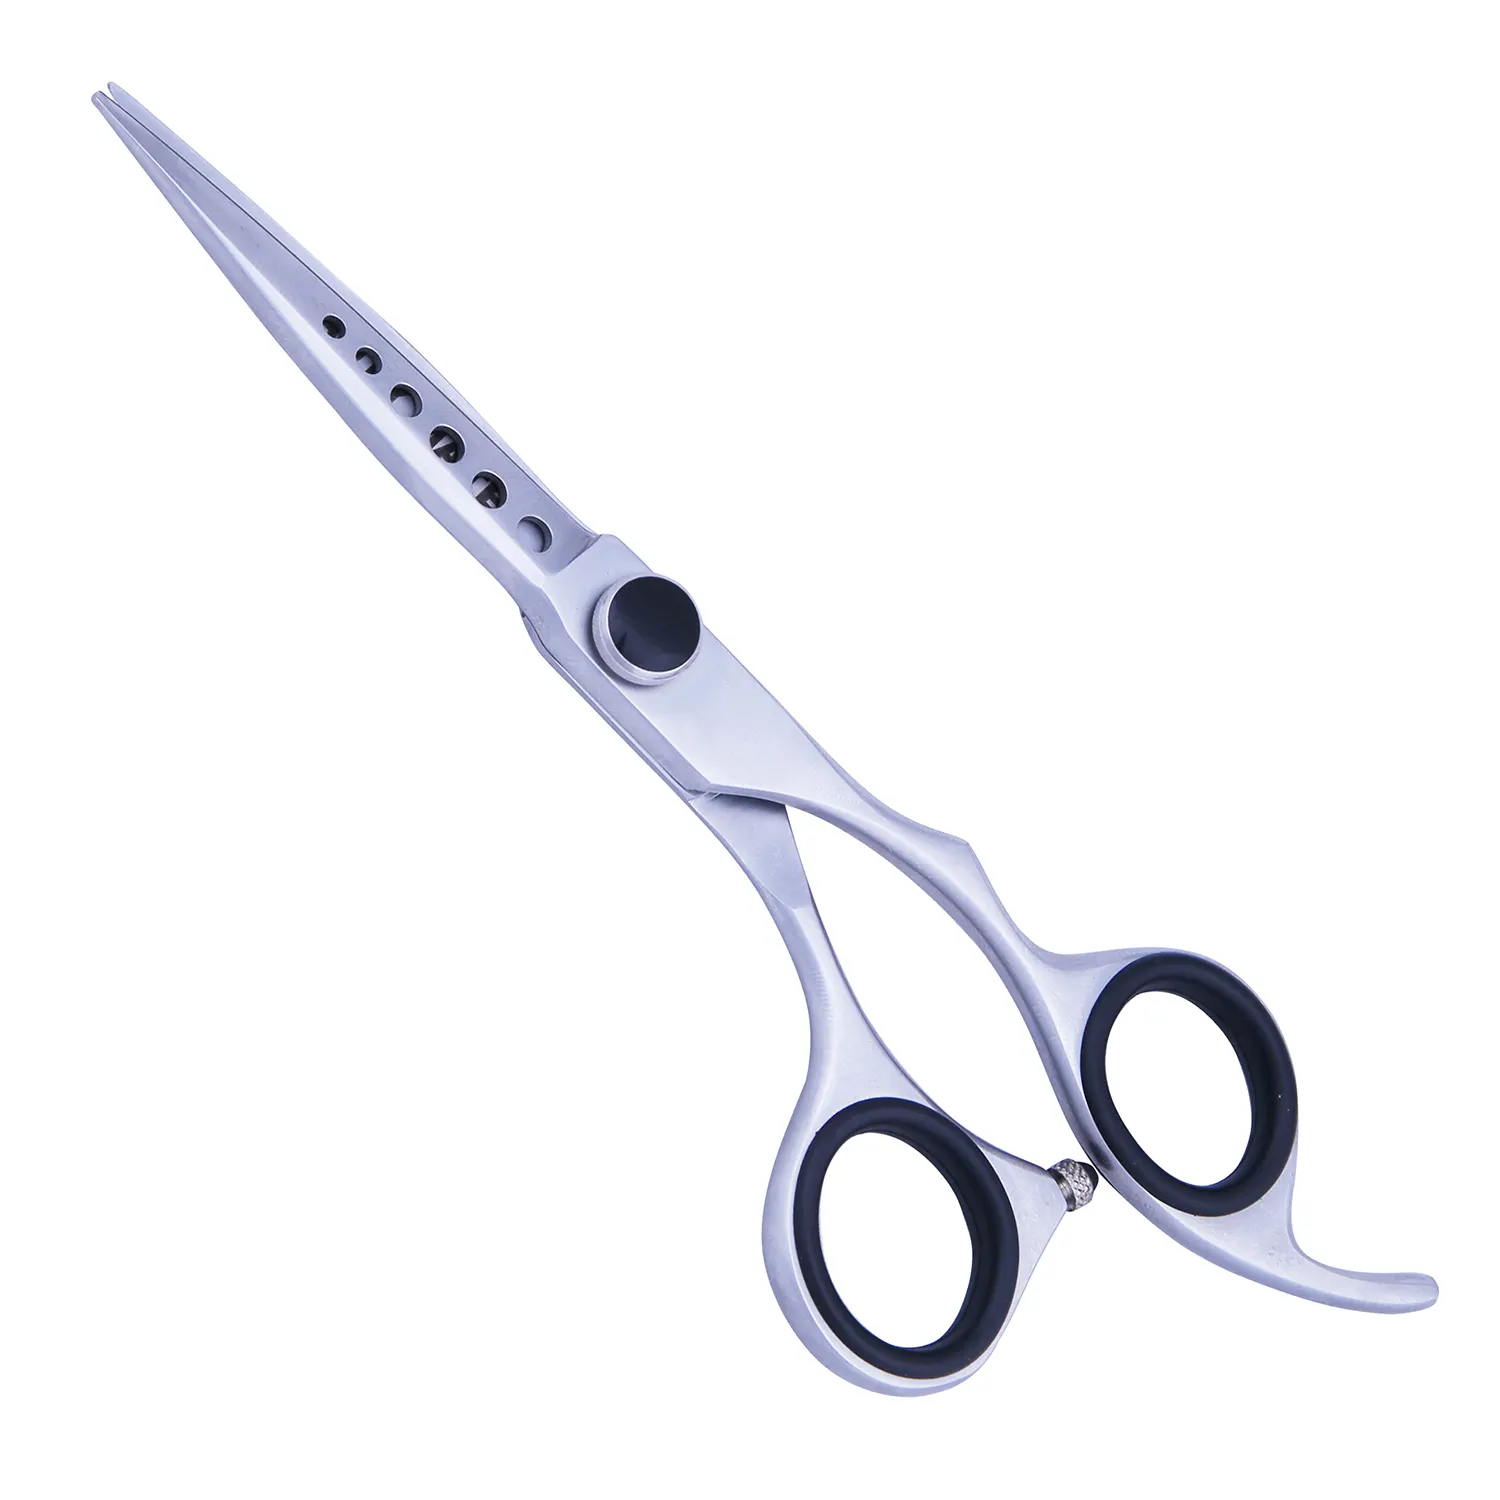 Professional Hair Cutting Scissors With Fix Finger Rest Hook Japanese Stainless Hairdressing Salon Scissor Size 6 Inch 6.5 Inch